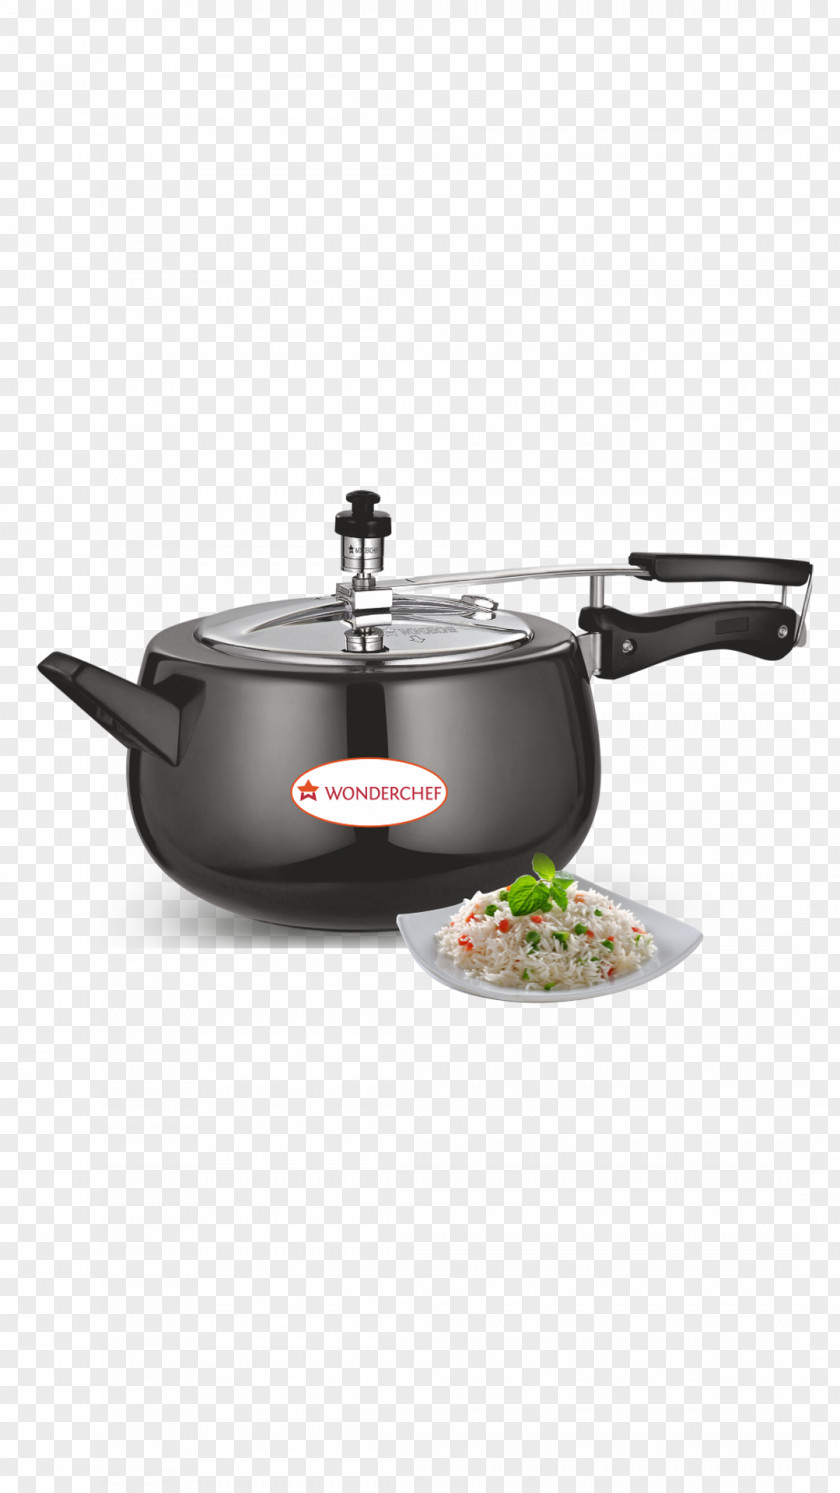 Frying Pan Wonderchef Pressure Cooking Stainless Steel Anodizing Lid PNG